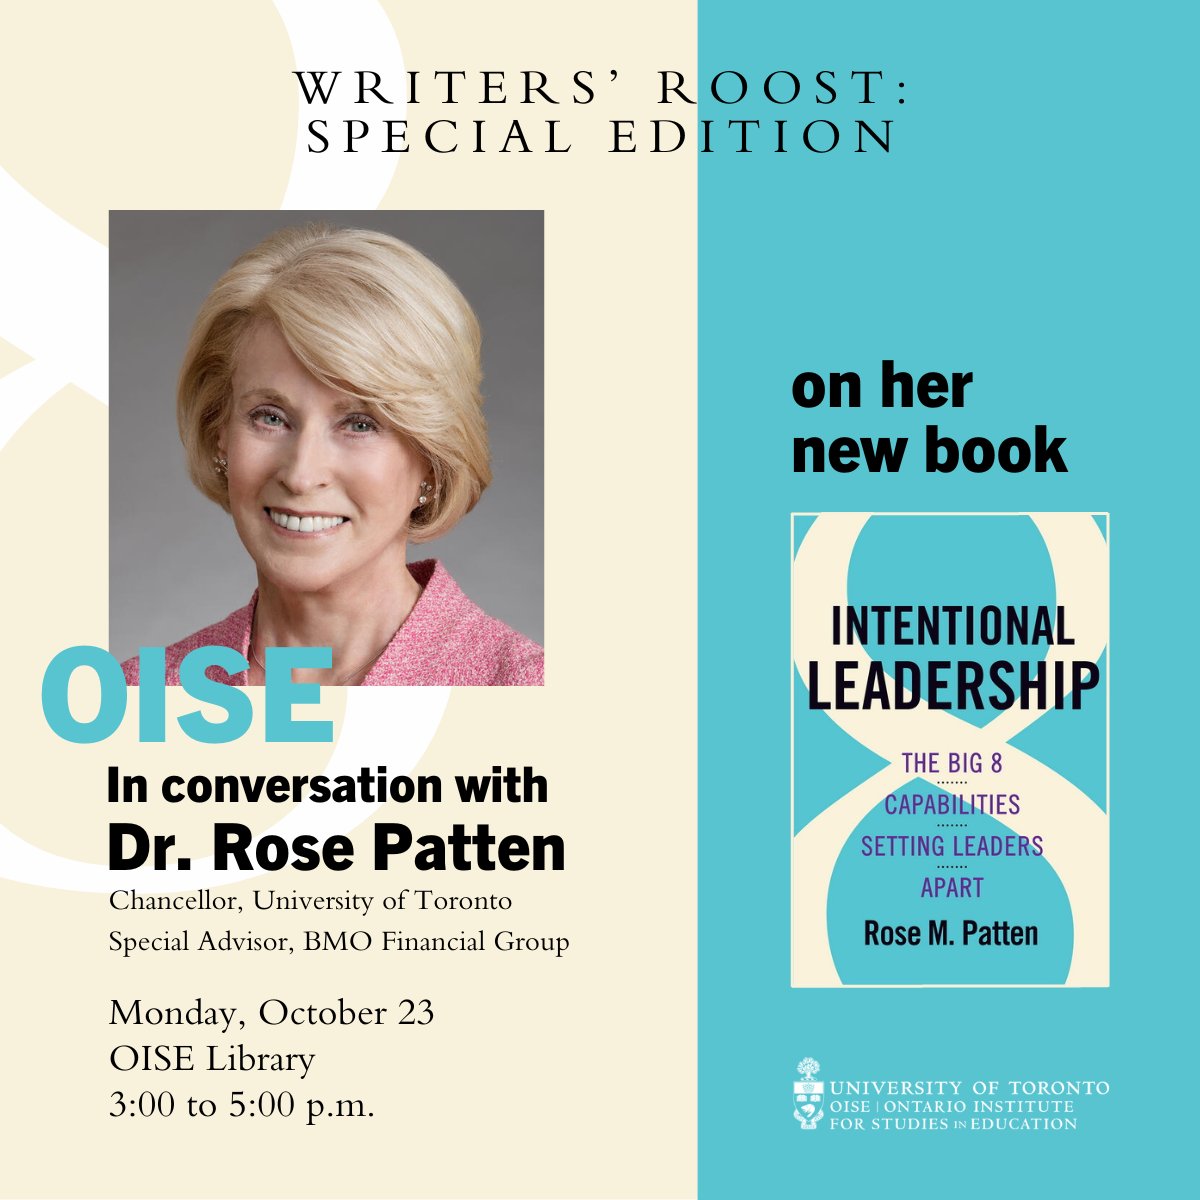 Join us on Oct 23 for an exclusive talk on leadership with Dr. Rose M. Patten, @UofT Chancellor and one of Canada's most influential leaders. Discover essential leadership skills and qualities that set top leaders apart. Don't miss it! Register at oise.utoronto.ca/home/about/eve…